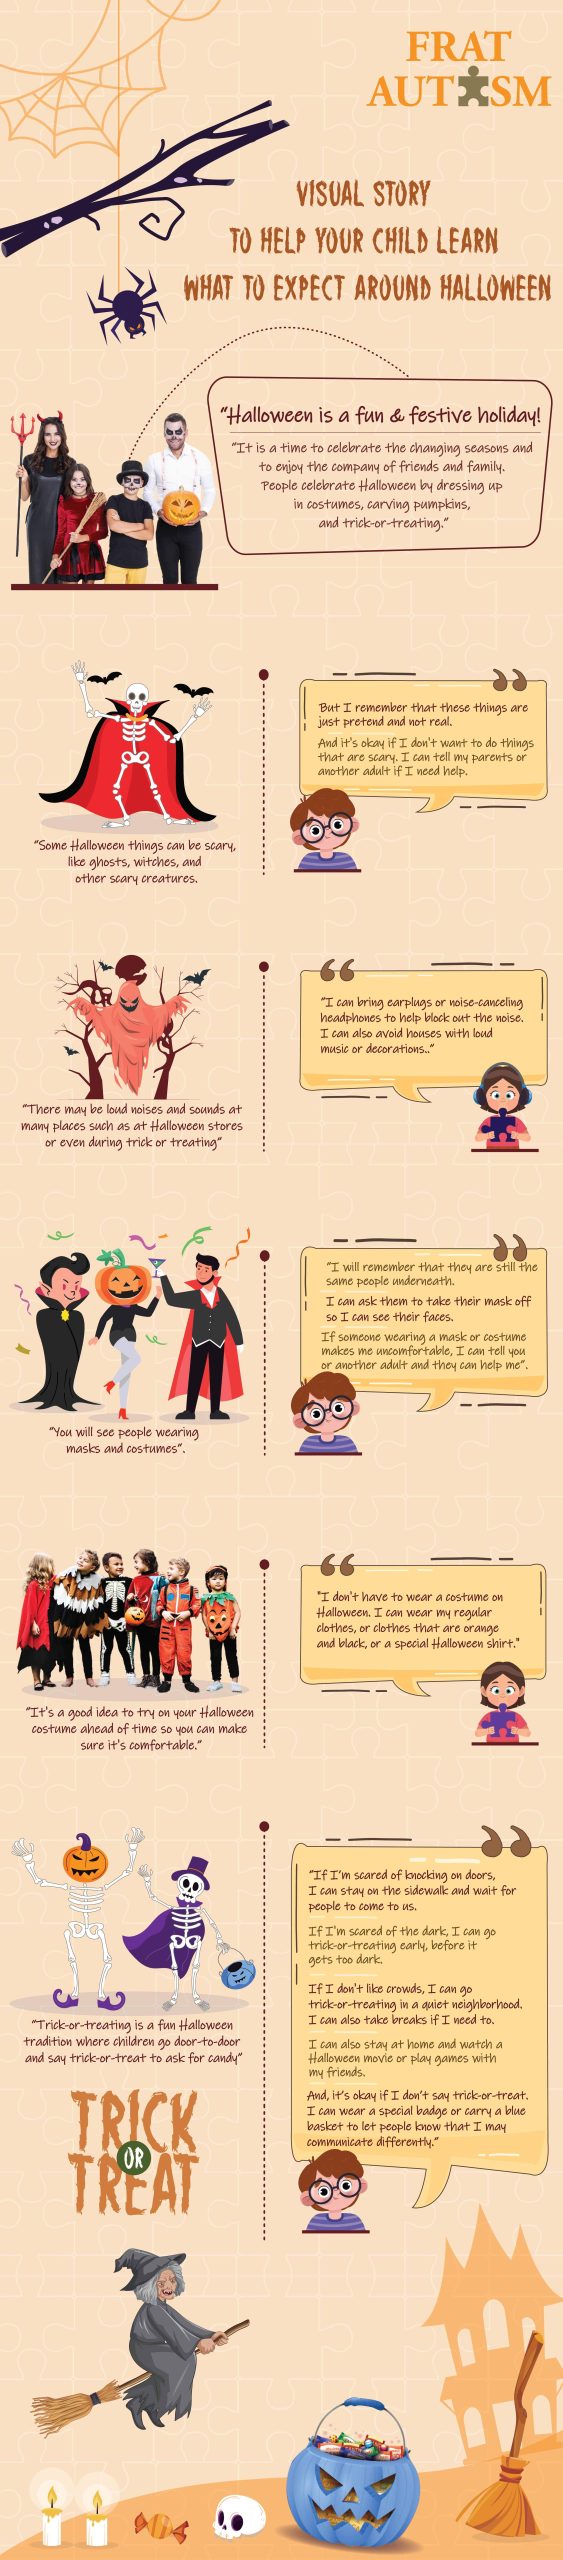 Visual story to help your child learn what to expect around Halloween